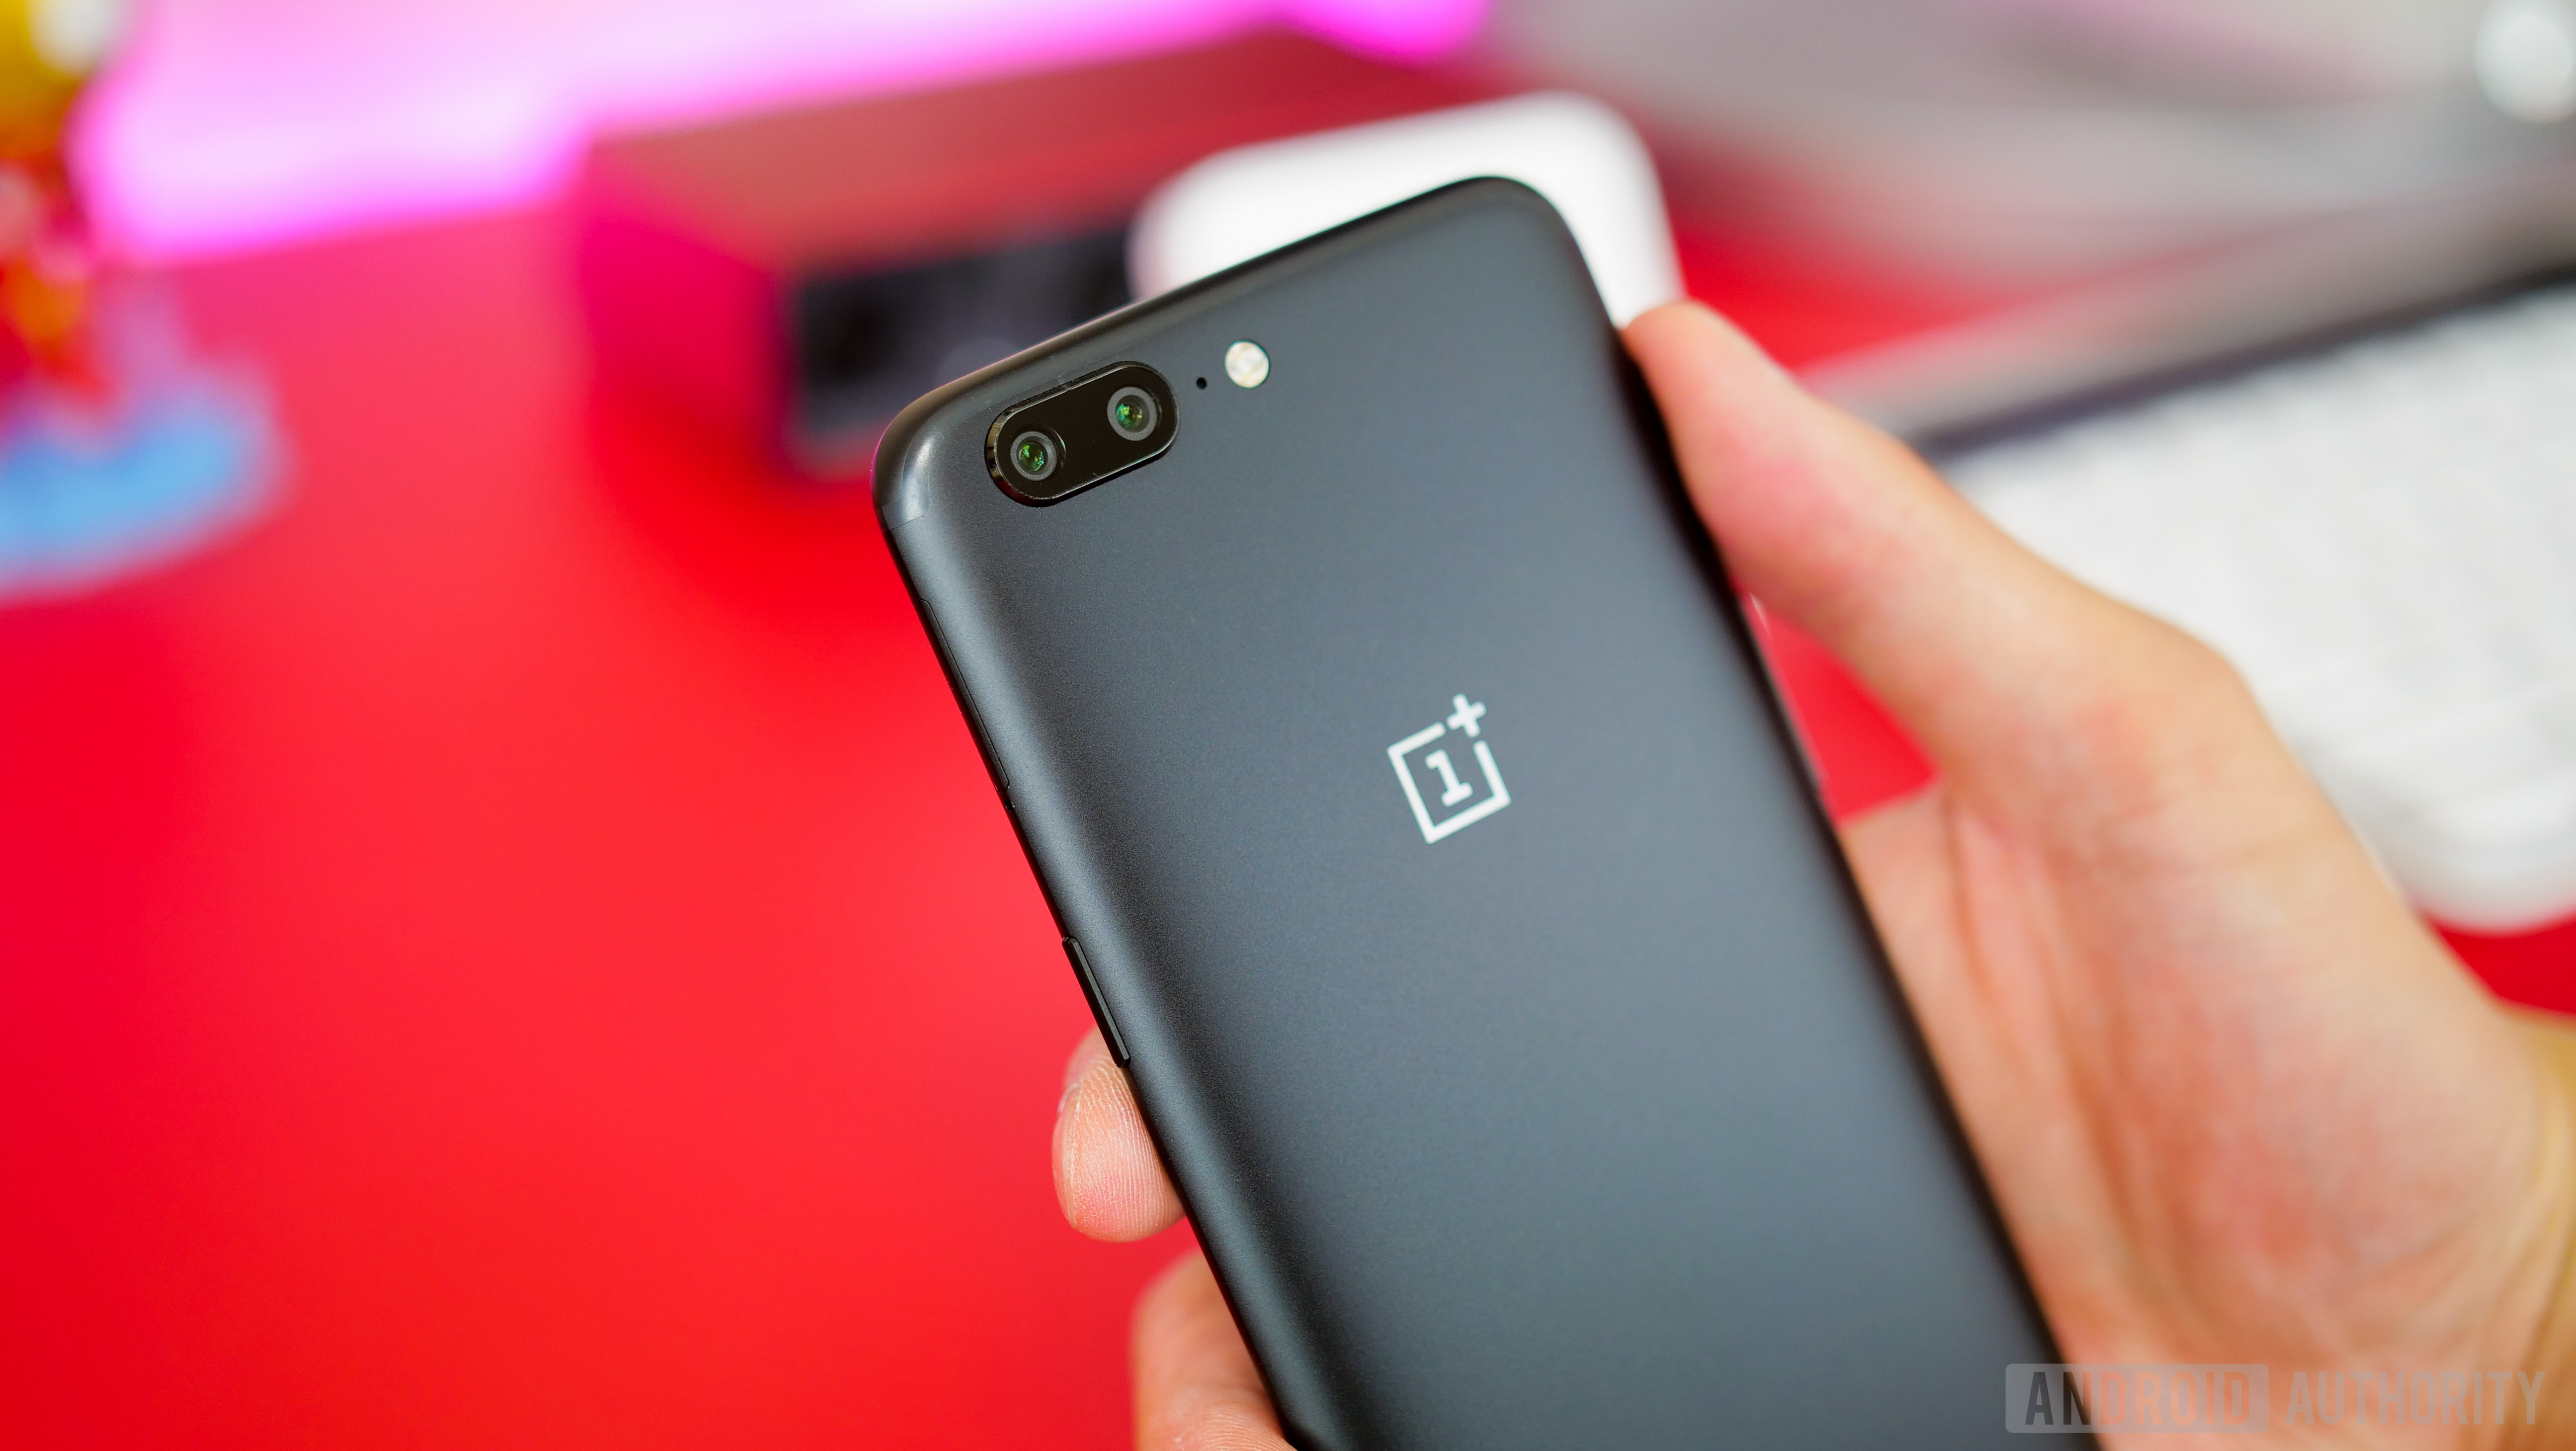 The OnePlus 5 in black, held in a person's hand, showing its rear cameras. 